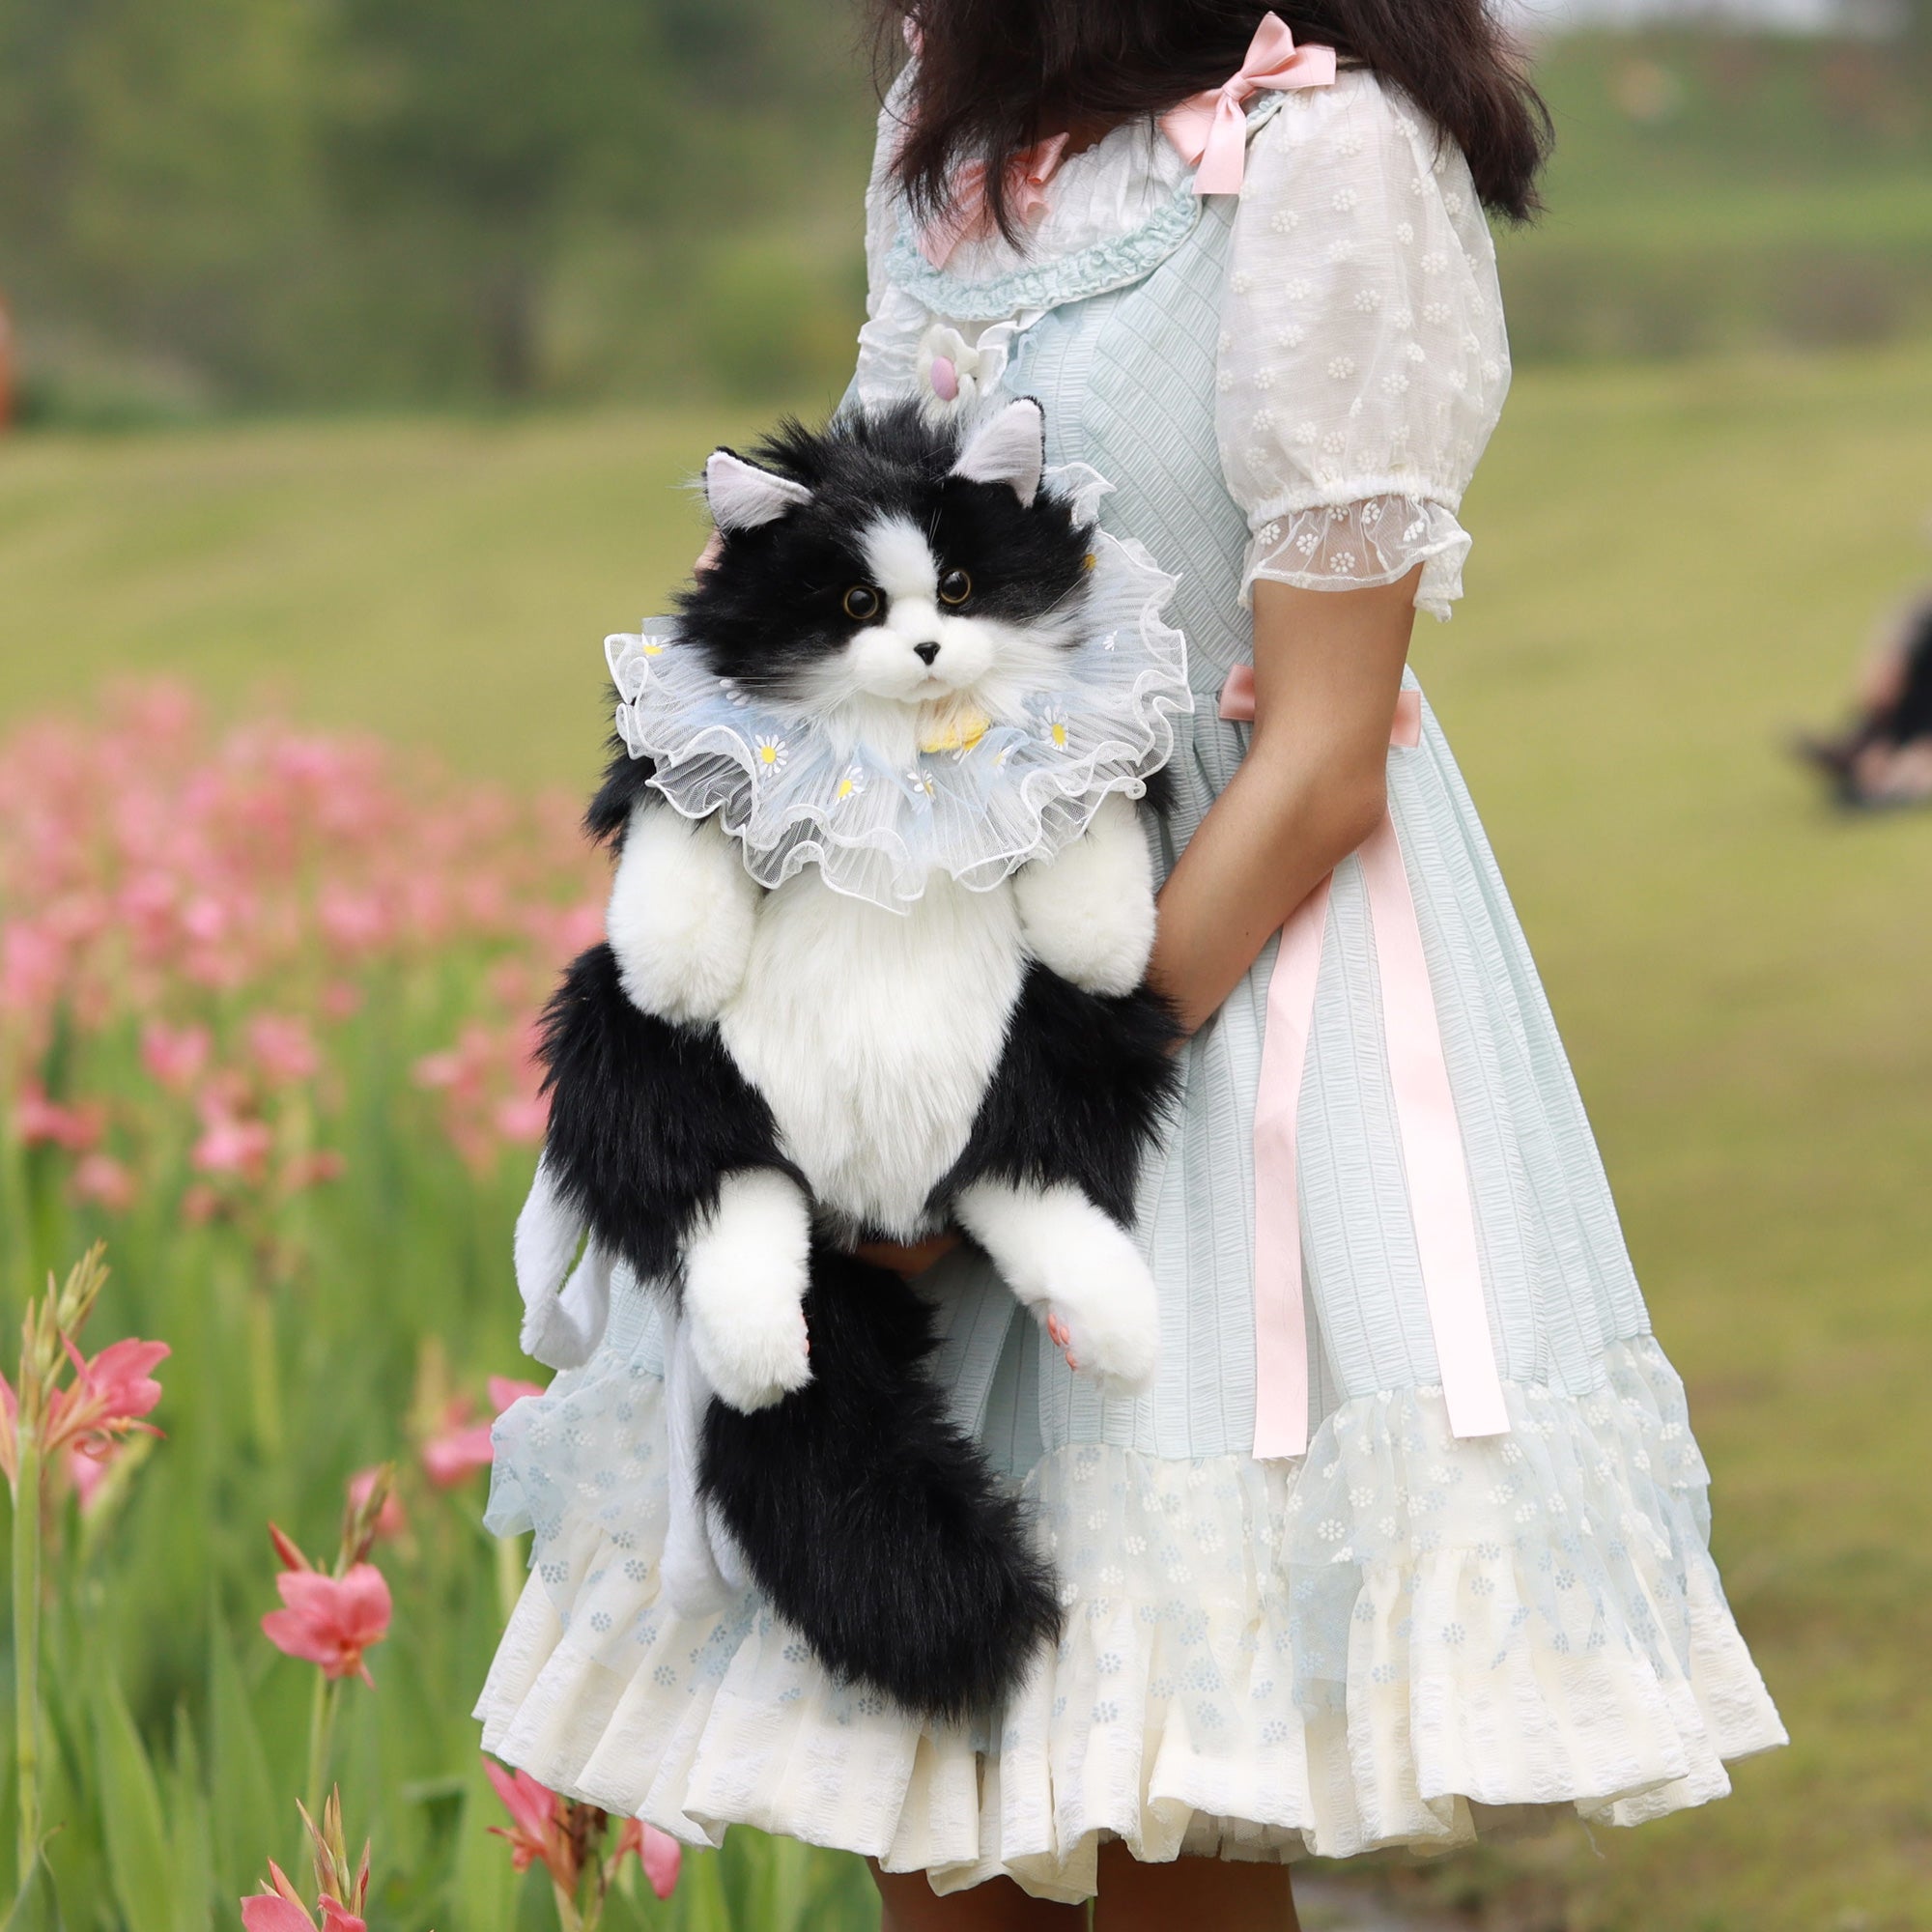 Chongker Stuffed Realistic Black Cat Shaped Backpack Women - Perfect Fashion Accessory & Unique Gift for Cat Lovers